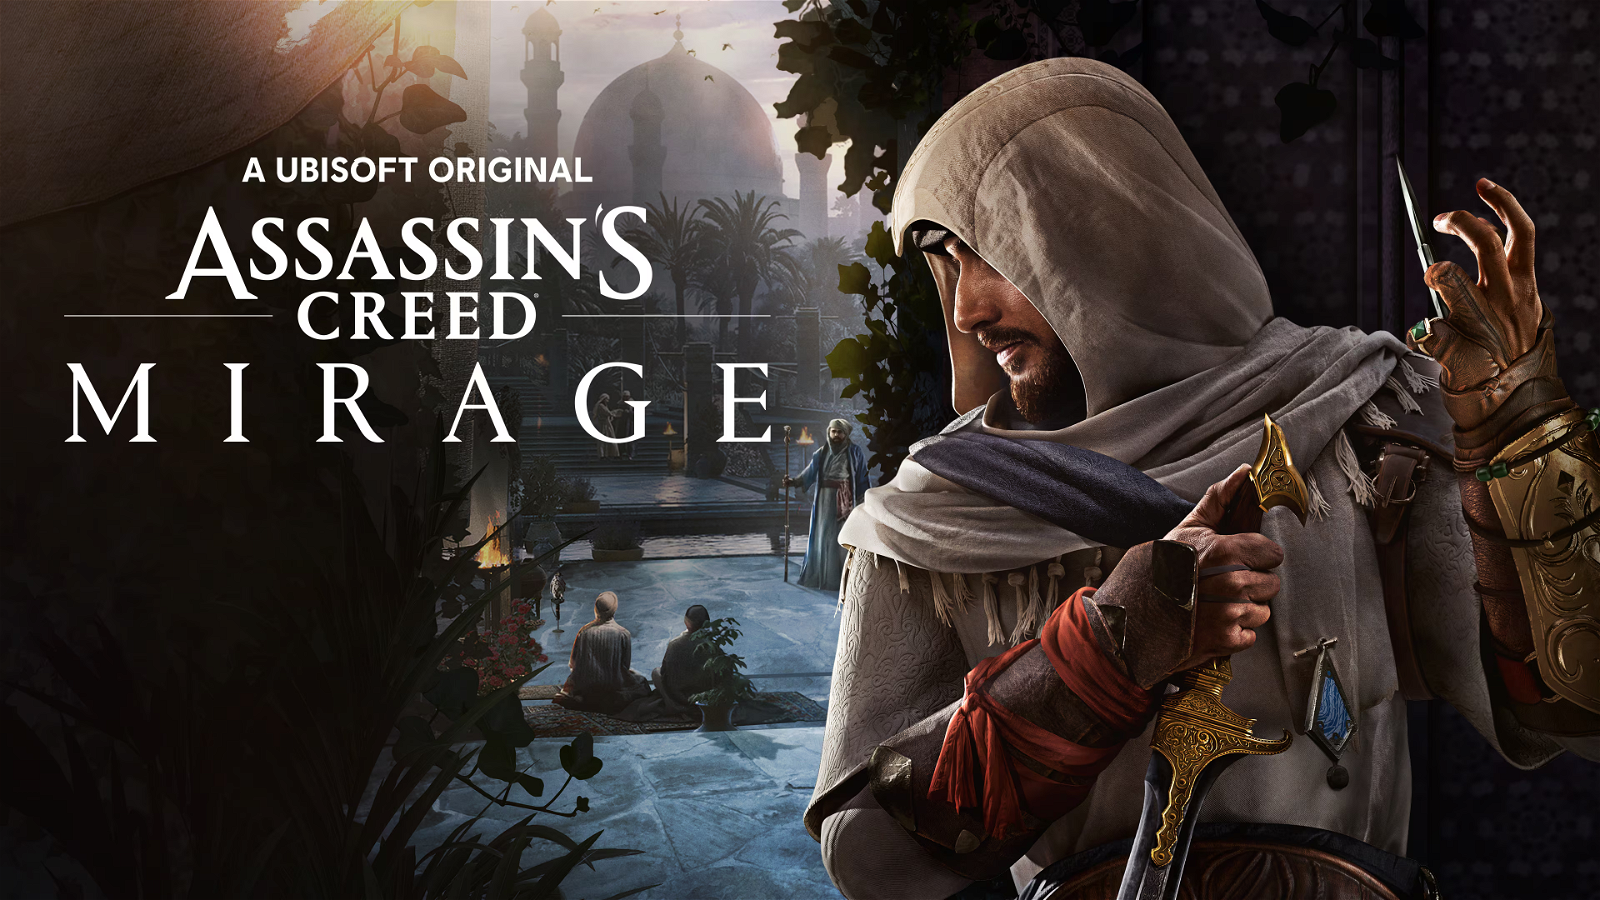 Most Anticipated Games of 2023 - Assassin’s Creed Mirage